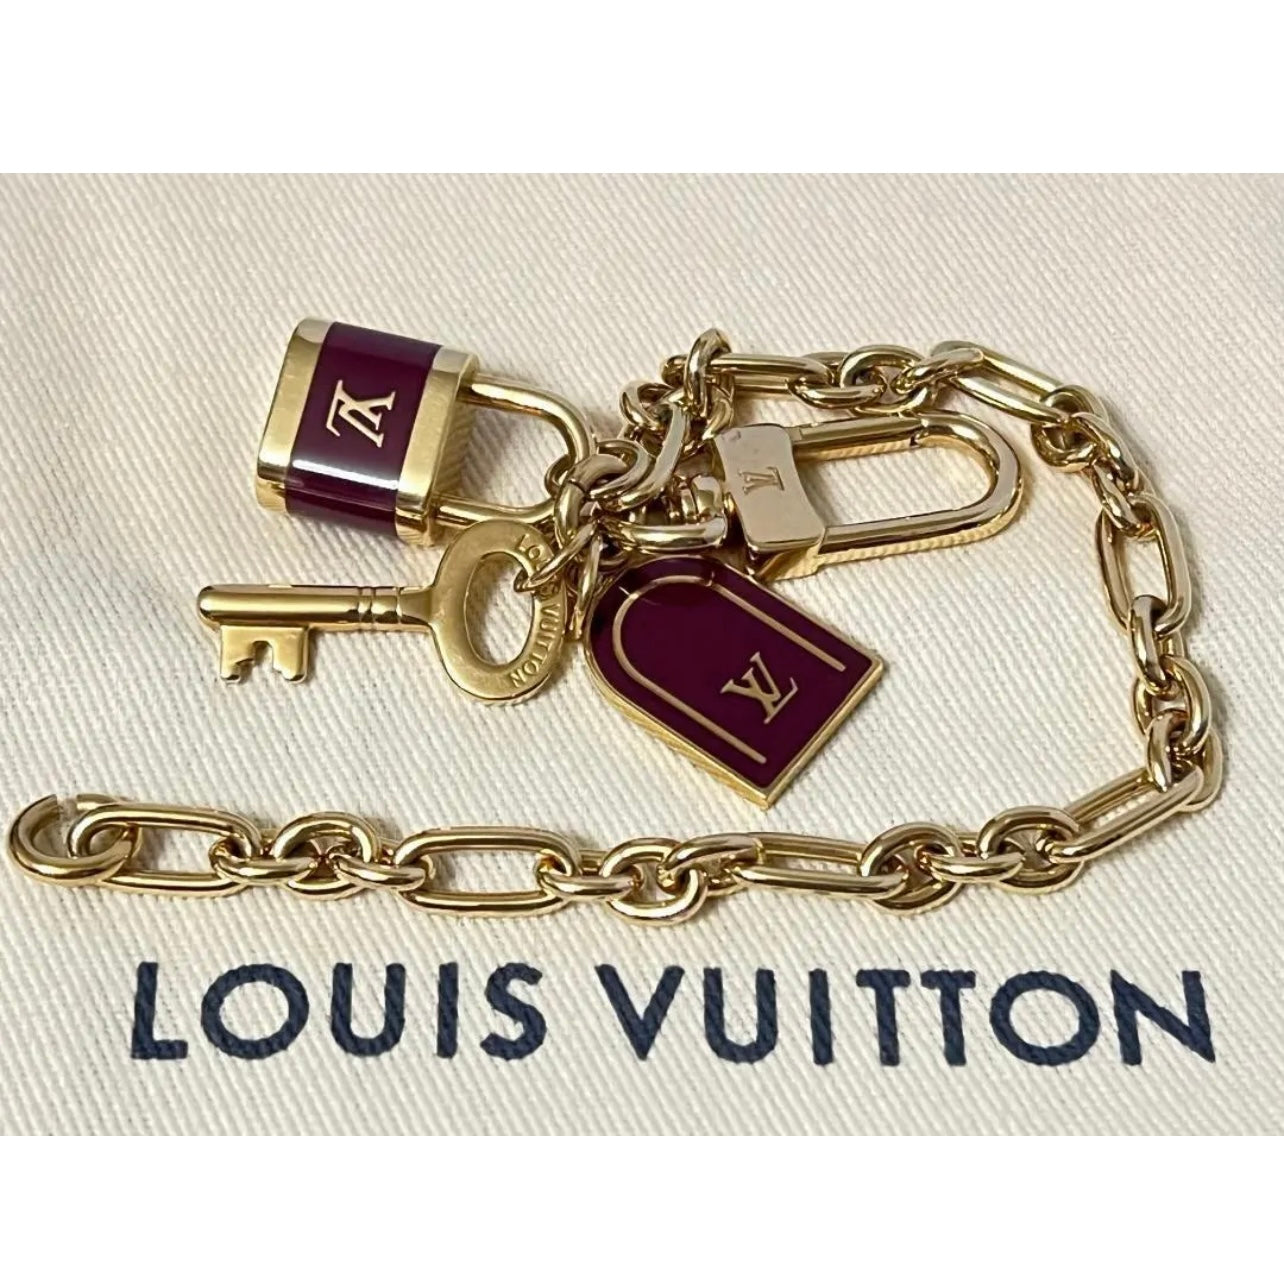 Louis Vuitton Charm Necklace Repurposed Red Charm